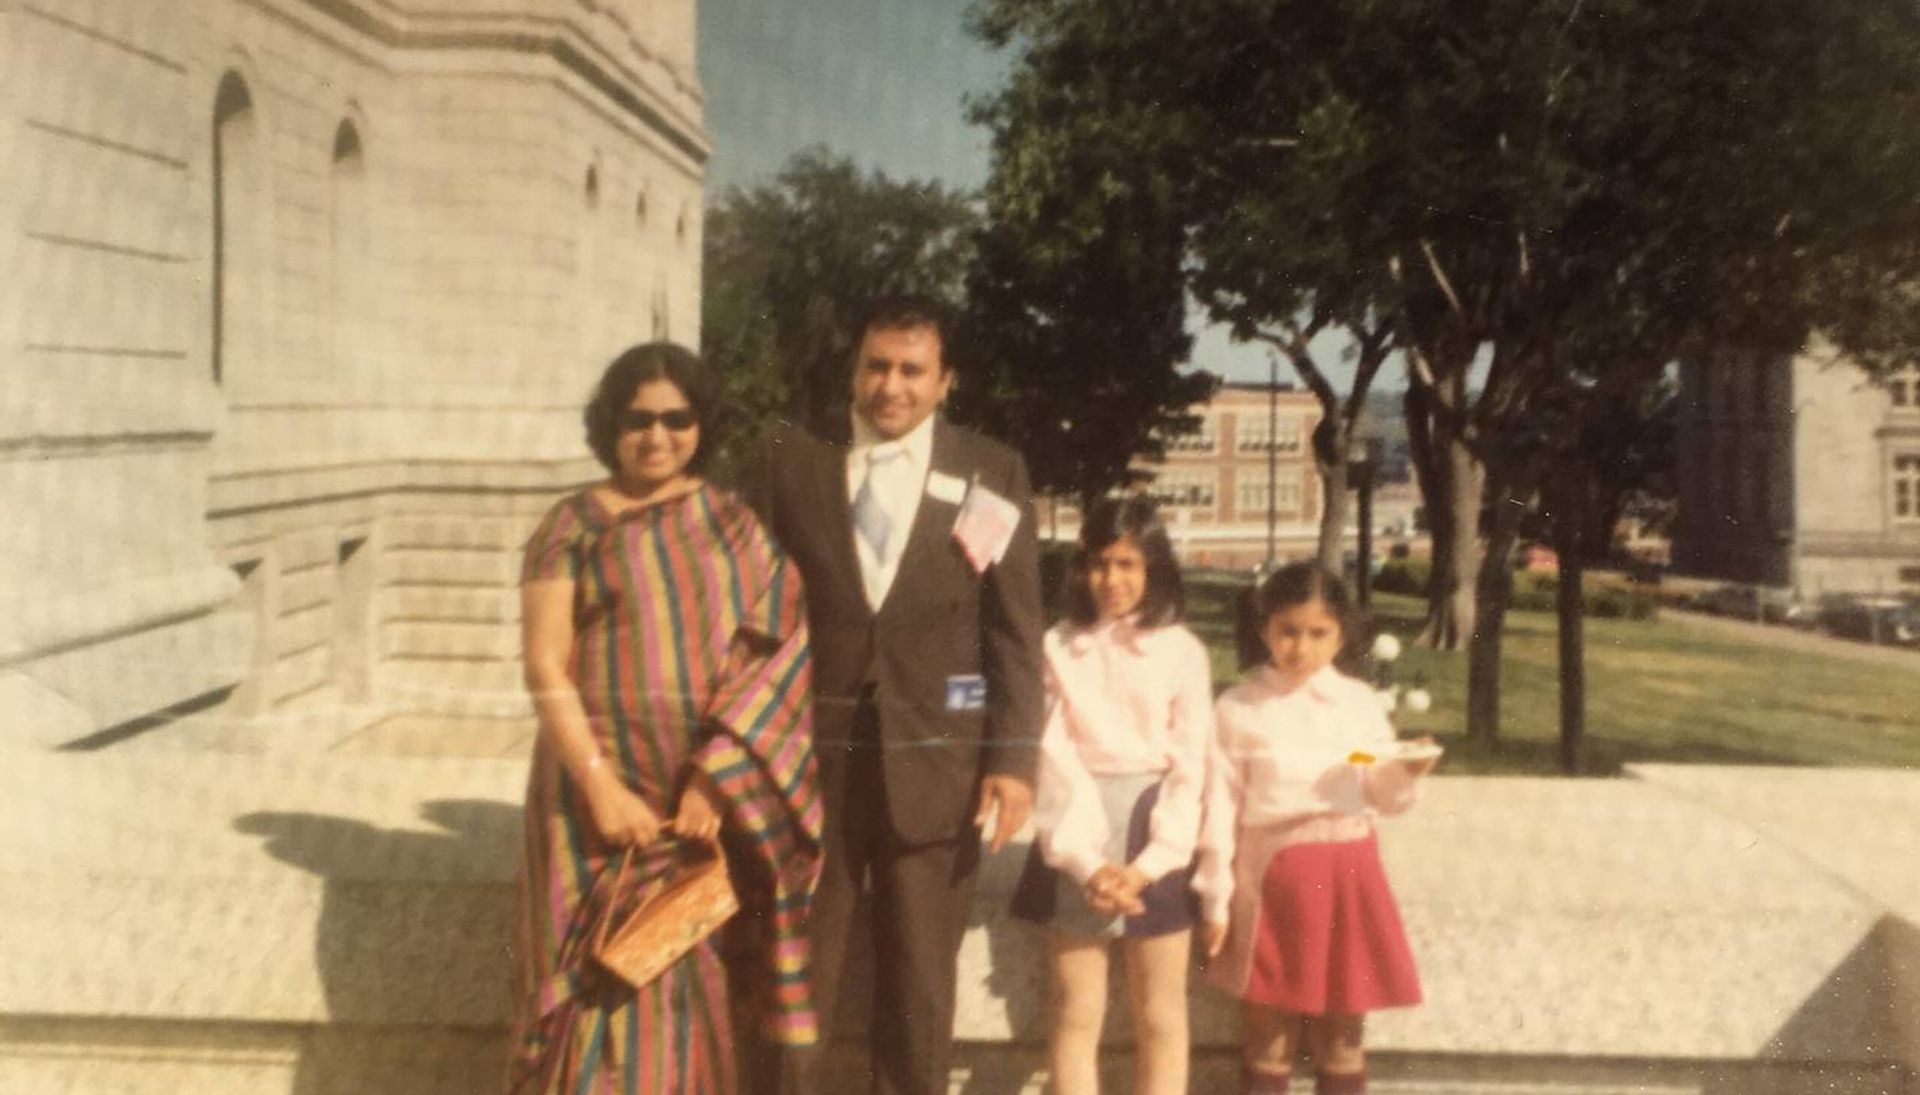 Punita's family at the Minnesota State Capitol, celebrating her father gaining citizenship, September 17, 1976